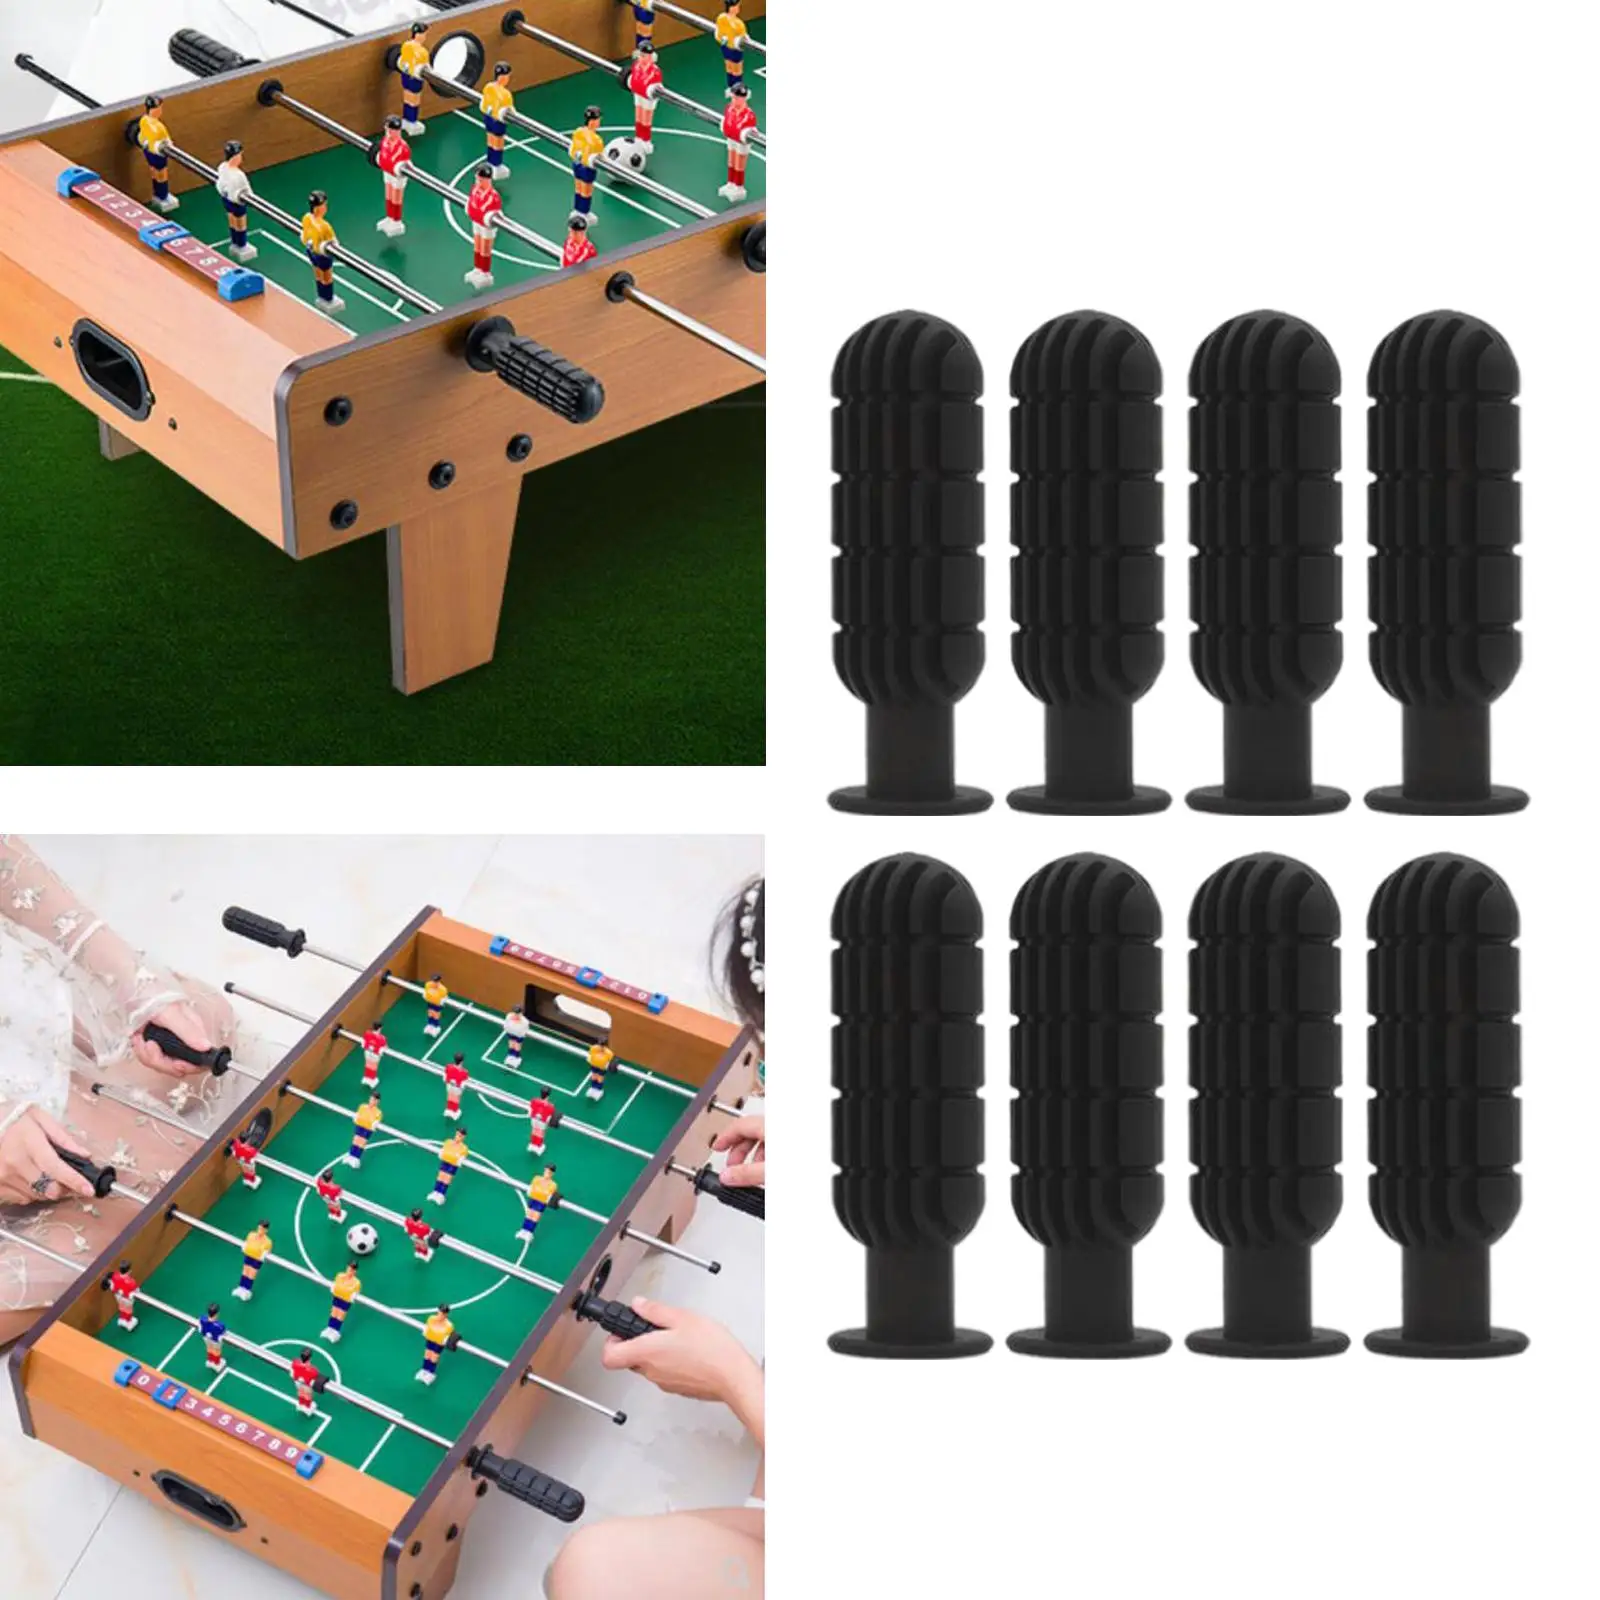 8 Pcs Table Soccer Foosball Handle Rod 94mm Foosball Soccer Table Football Machine Handle Grip Game Replacement Parts